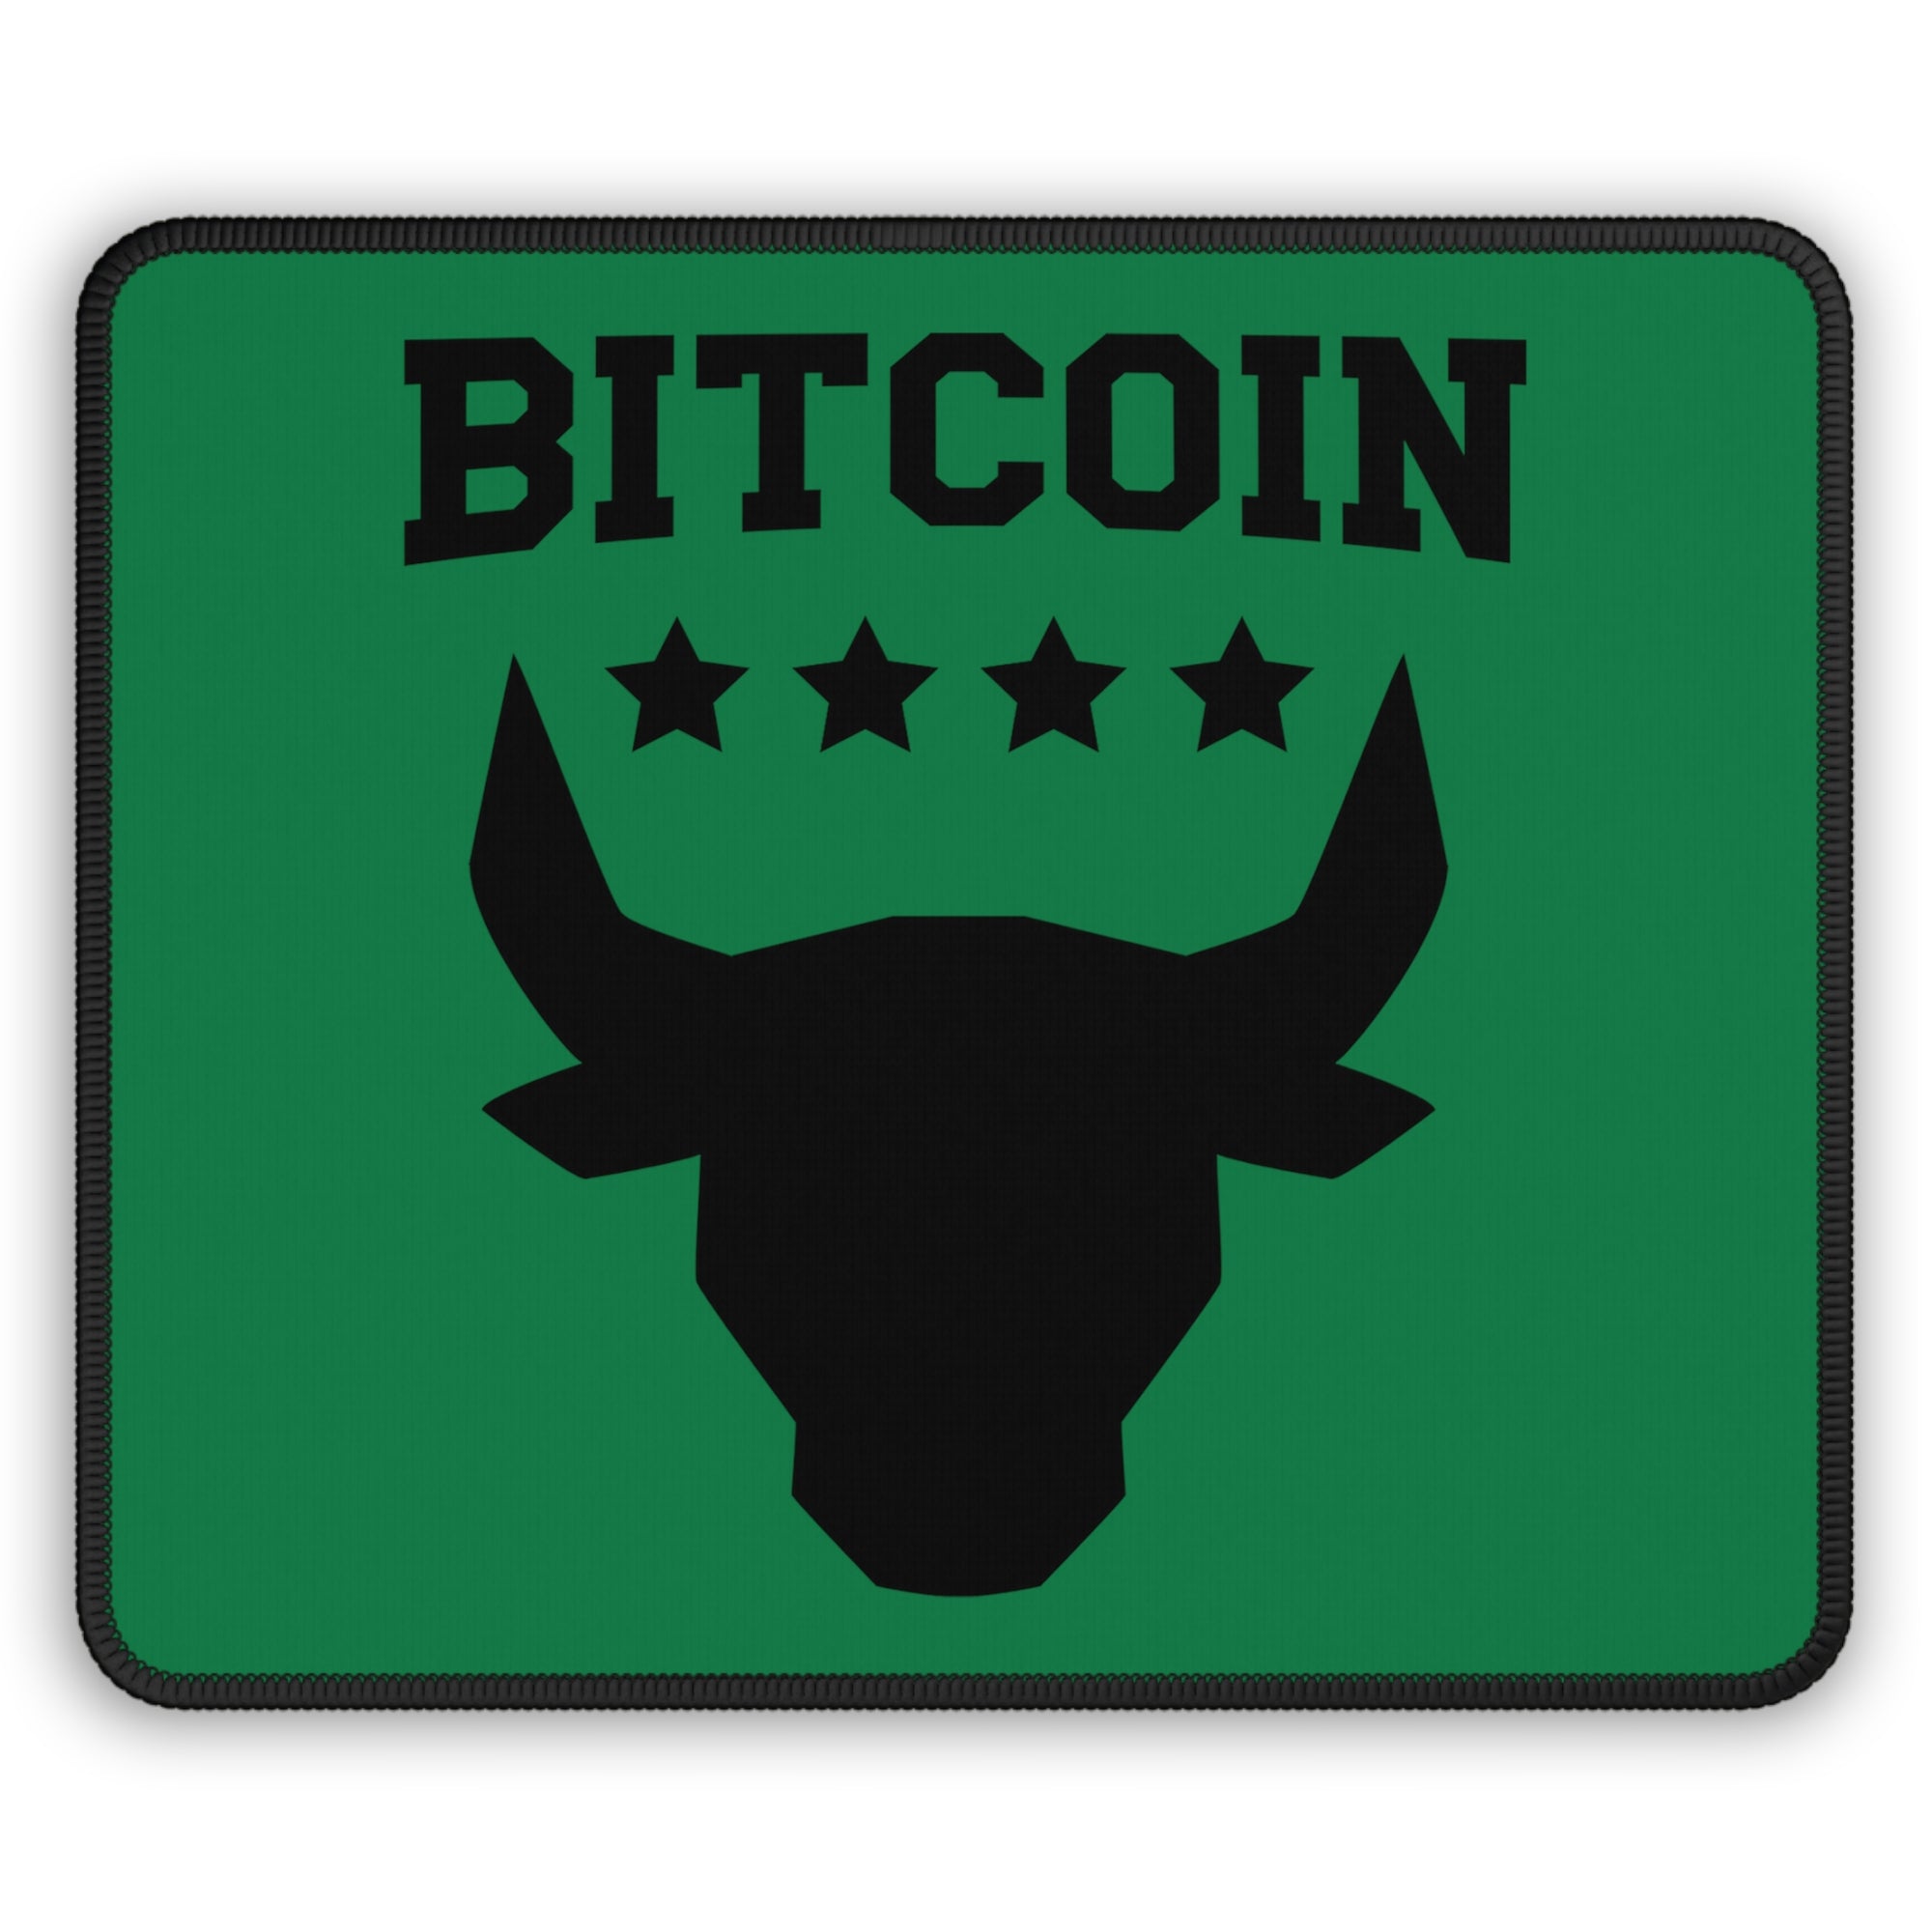 Bitcoin Merchandise - Bitcoin Bull Mouse Pad Close Up View.